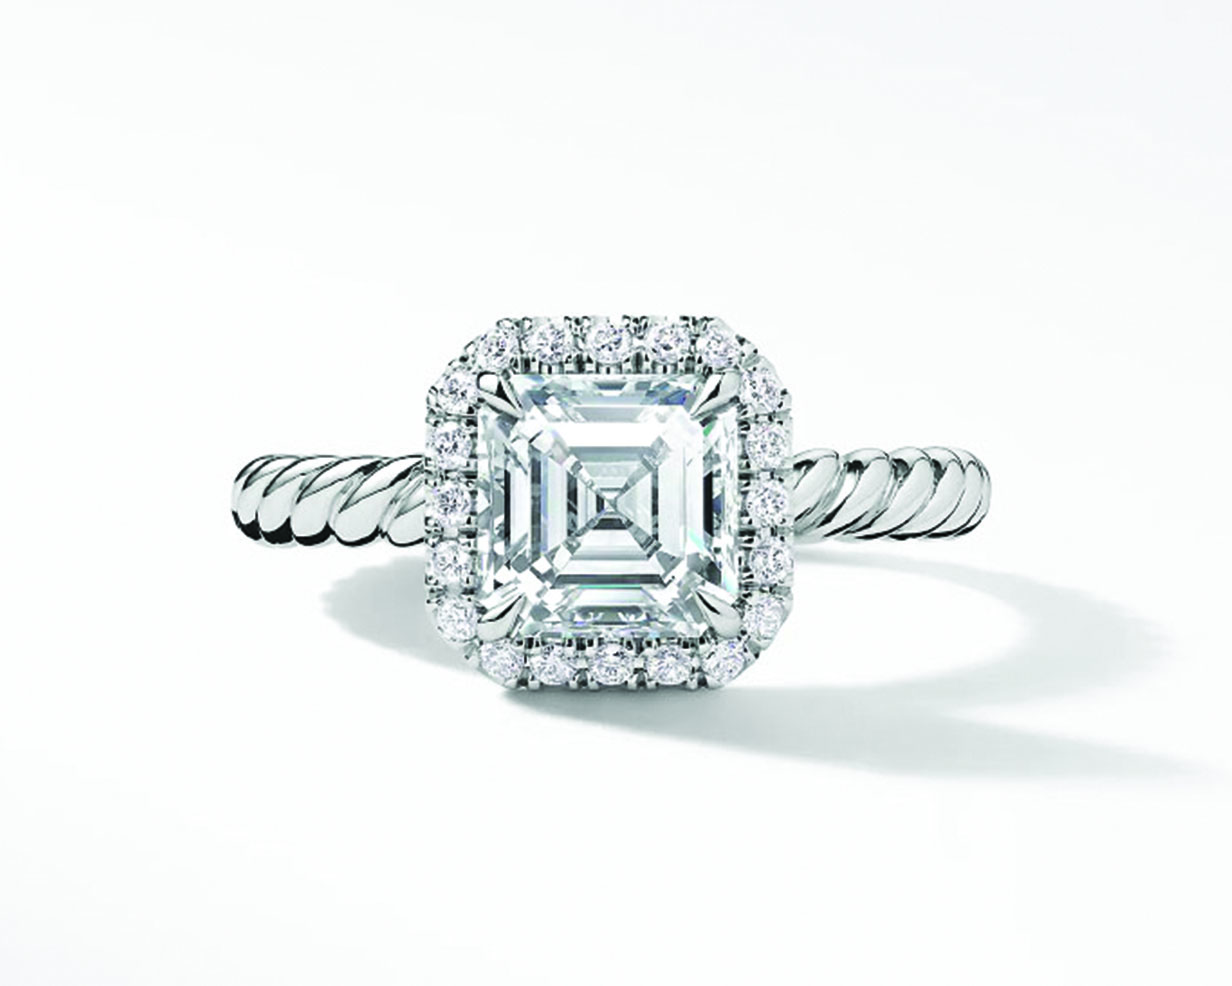 Asscher cut diamond engagement ring with paved halo and twisted platinum band